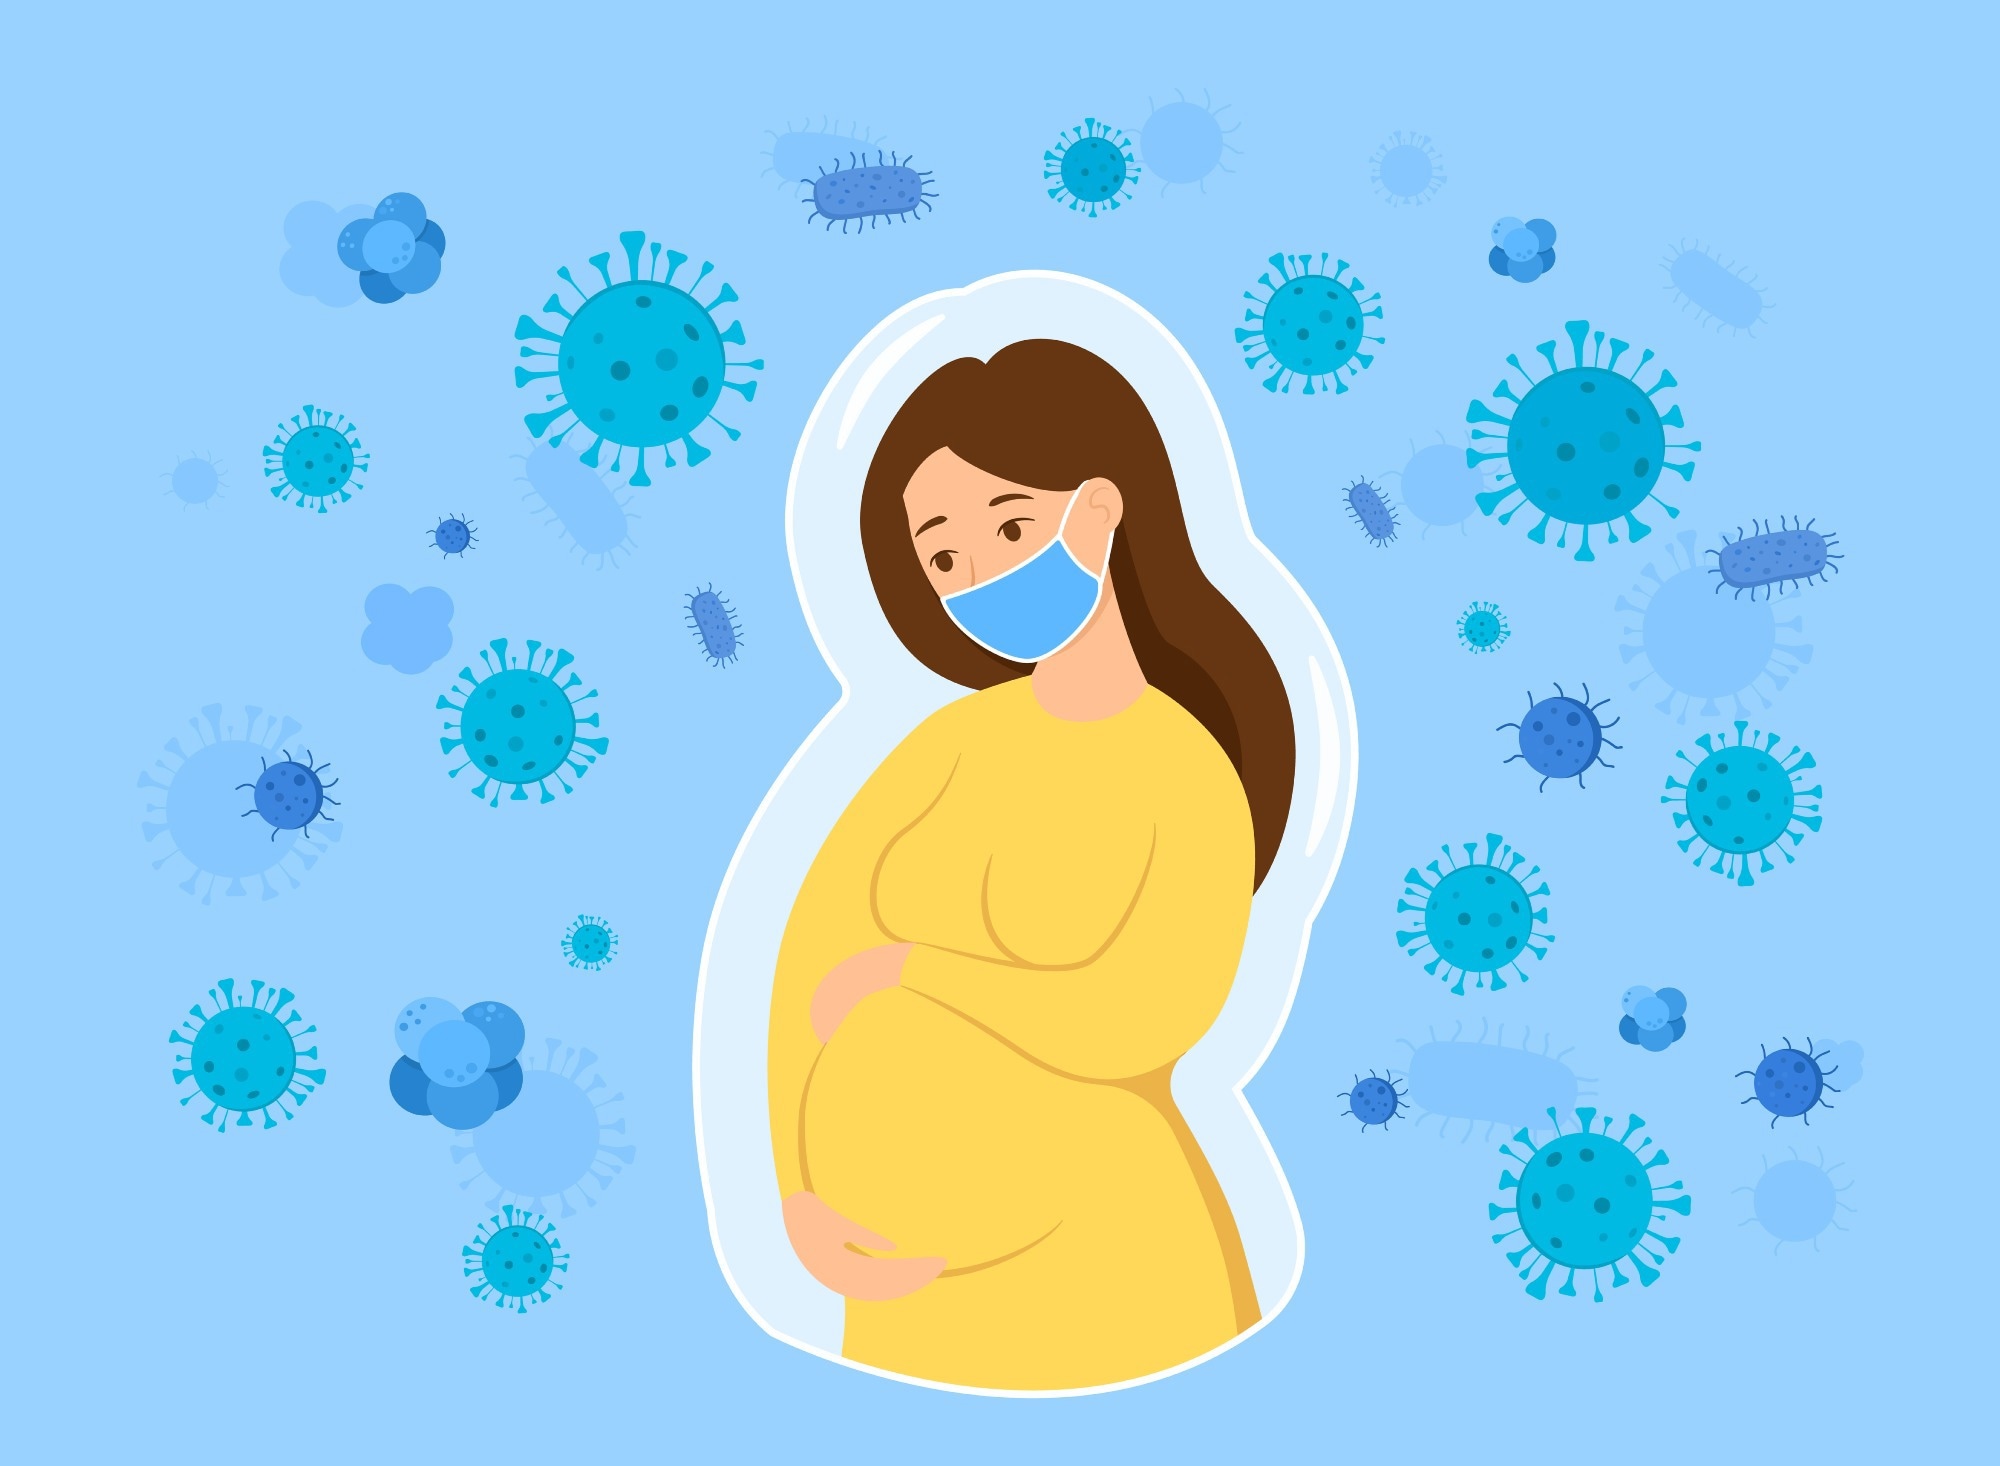 Study: Reduced control of SARS-CoV-2 infection is associated with lower mucosal antibody responses in pregnant women. Image Credit: mentalmind / Shutterstock